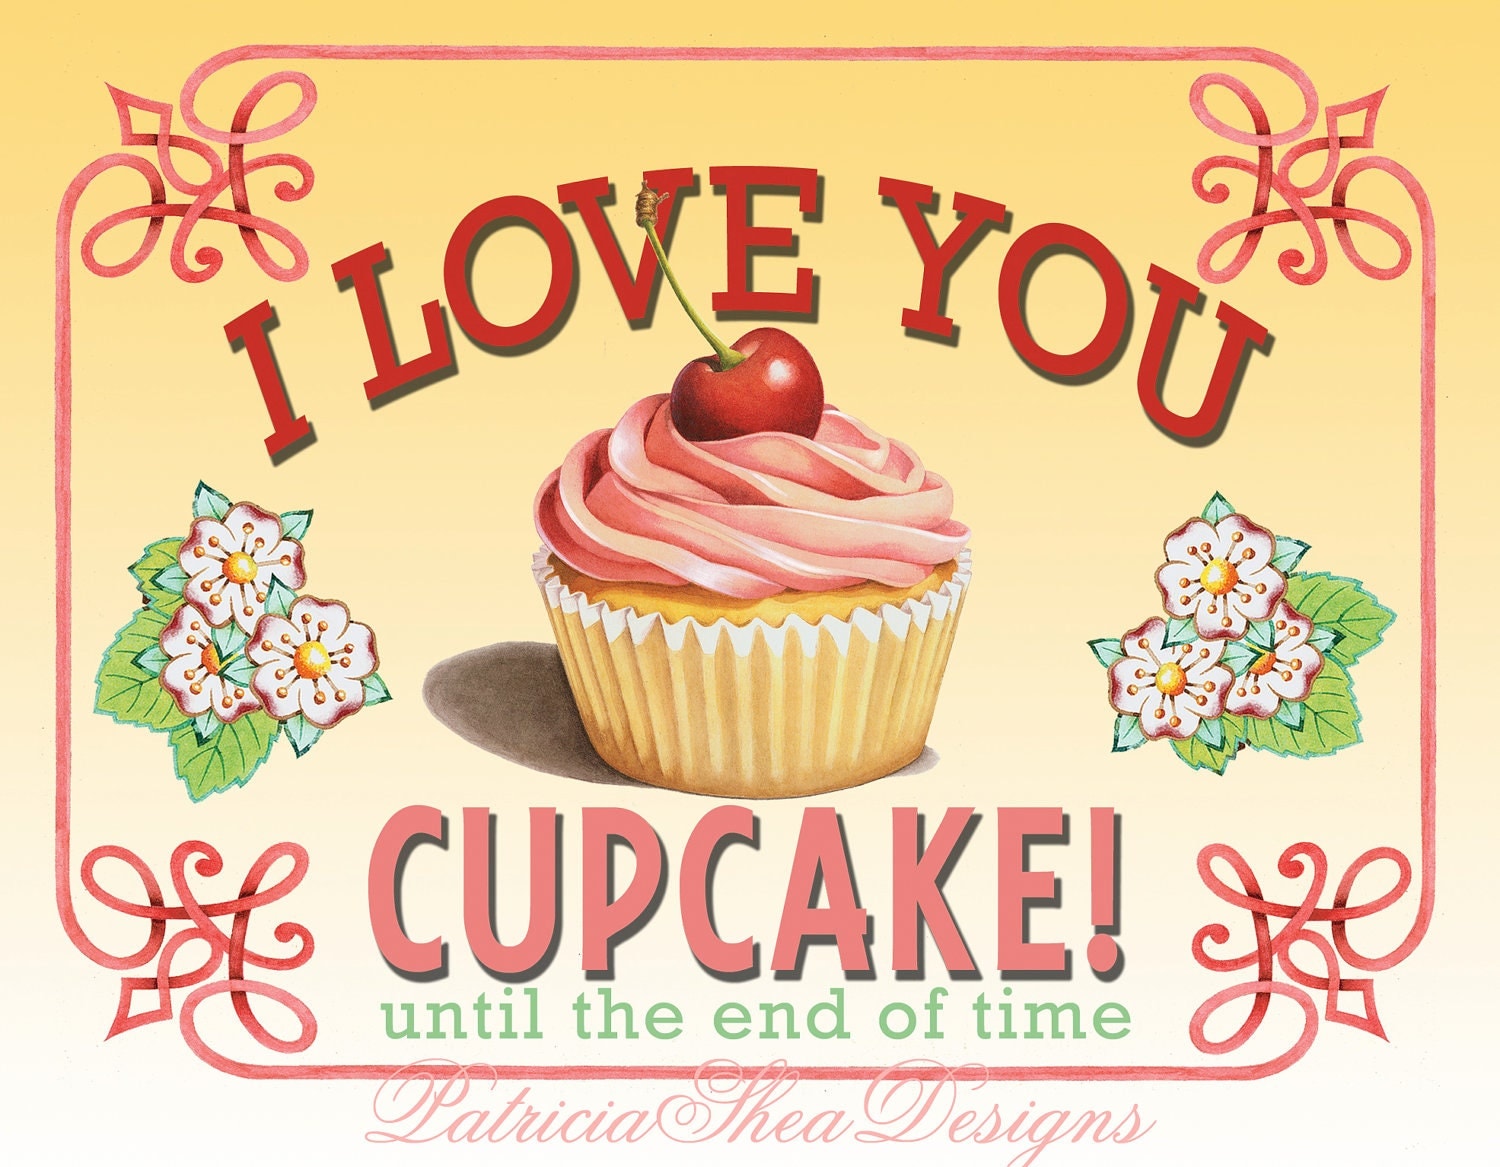 Wall vintage cupcakes  Art Posters posters Cafepress